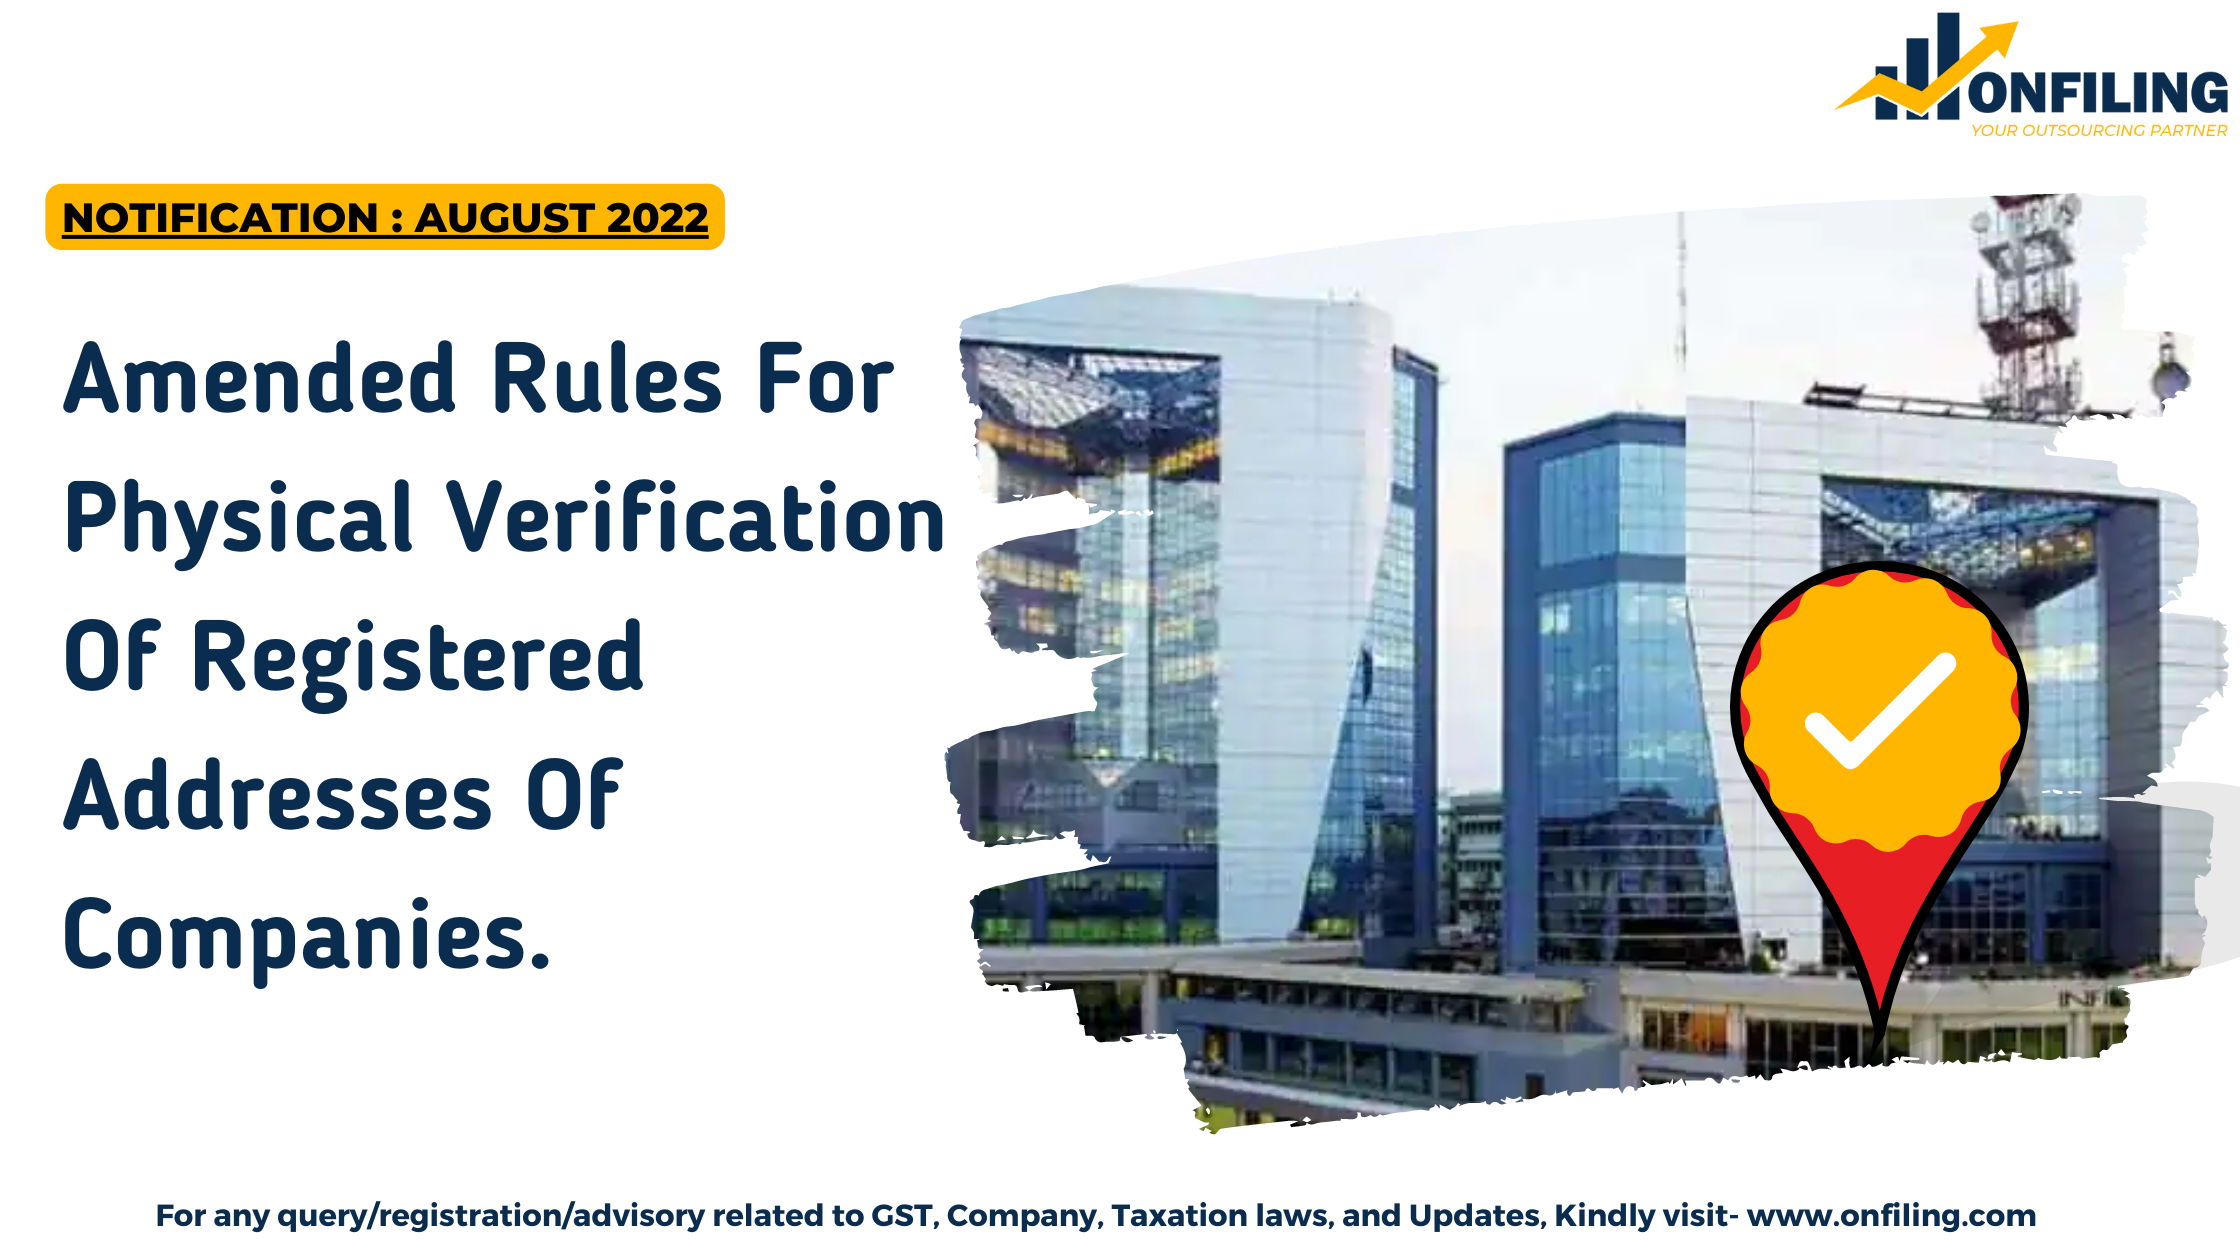 Amended Rules For Physical Verification Of address